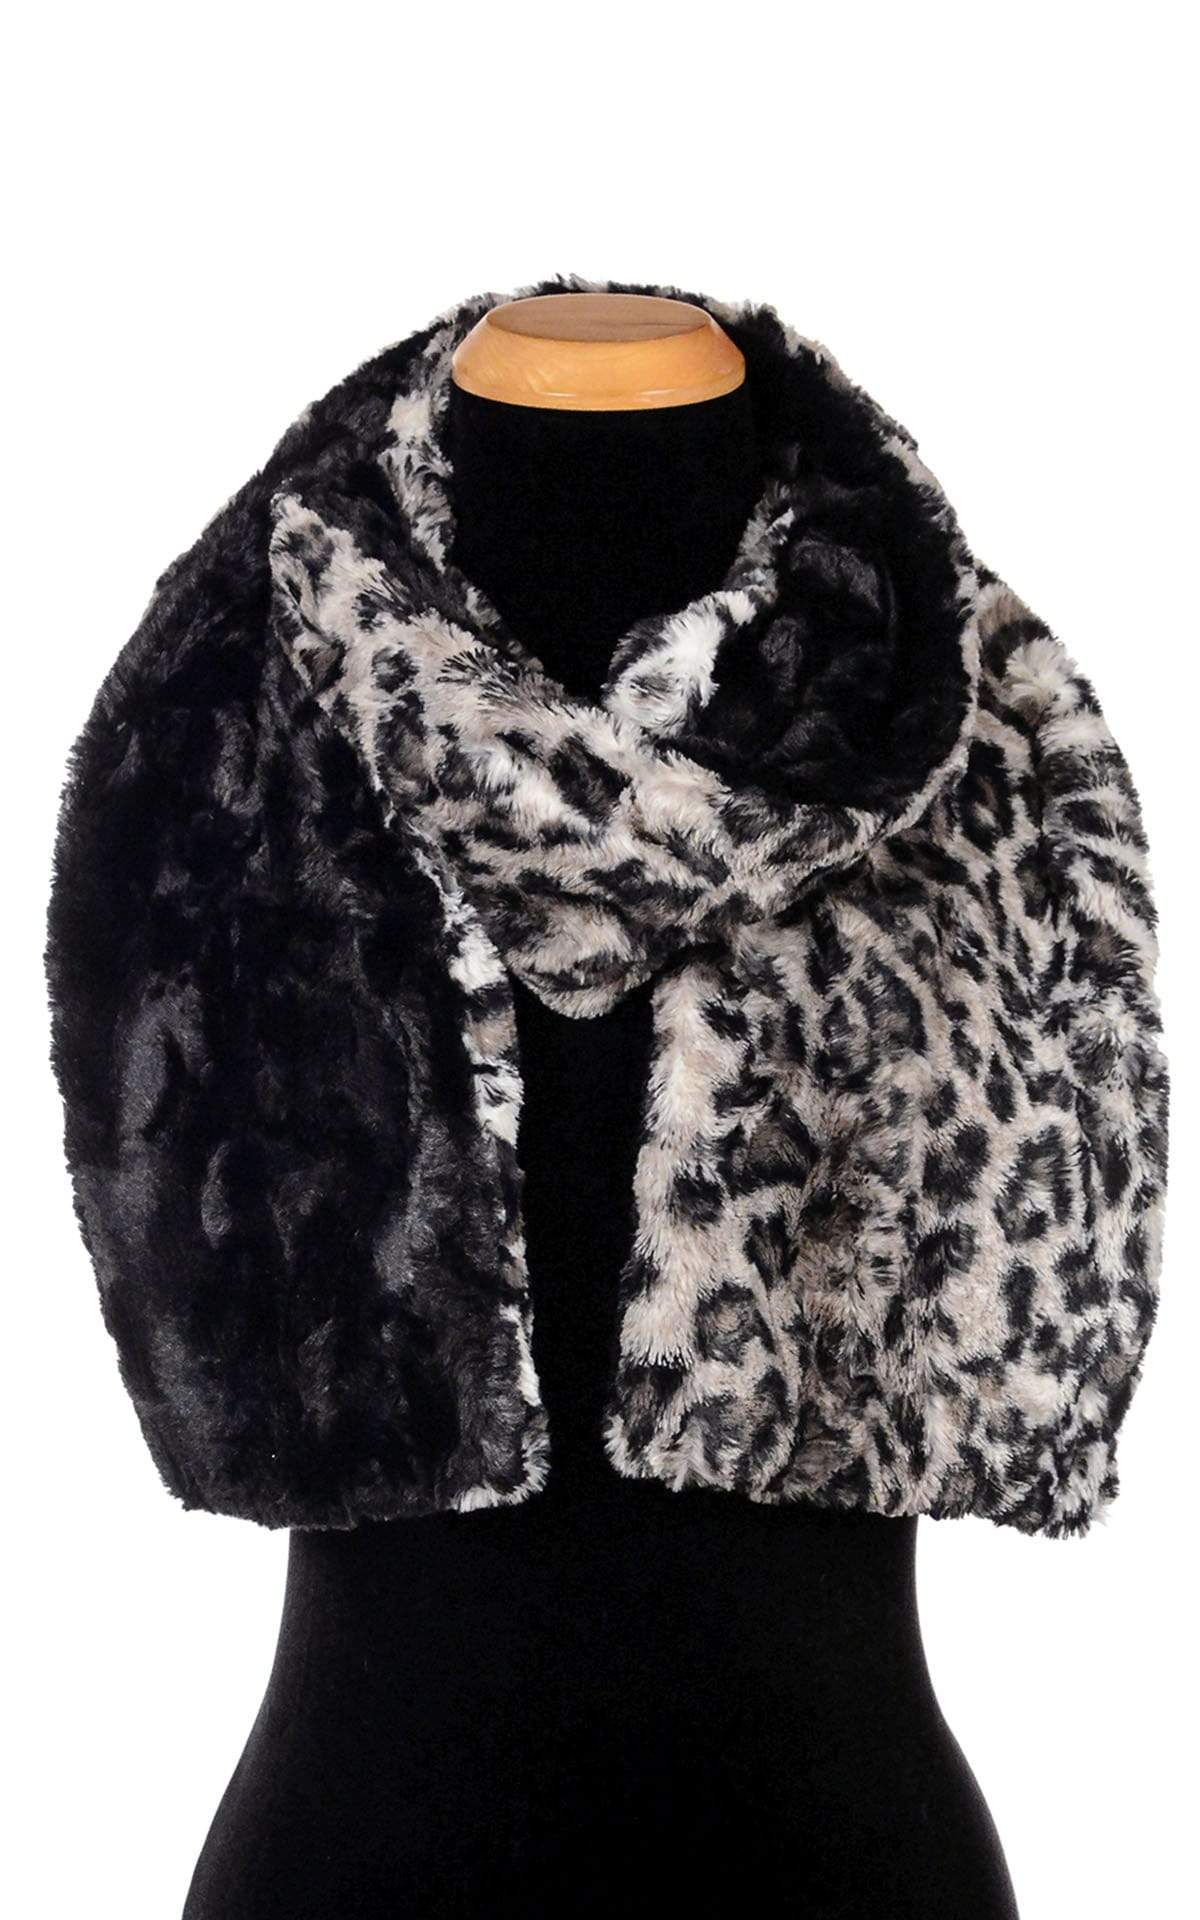 Classic Scarf - Two-Tone, Luxury Faux Fur Savannah Cat in Gray